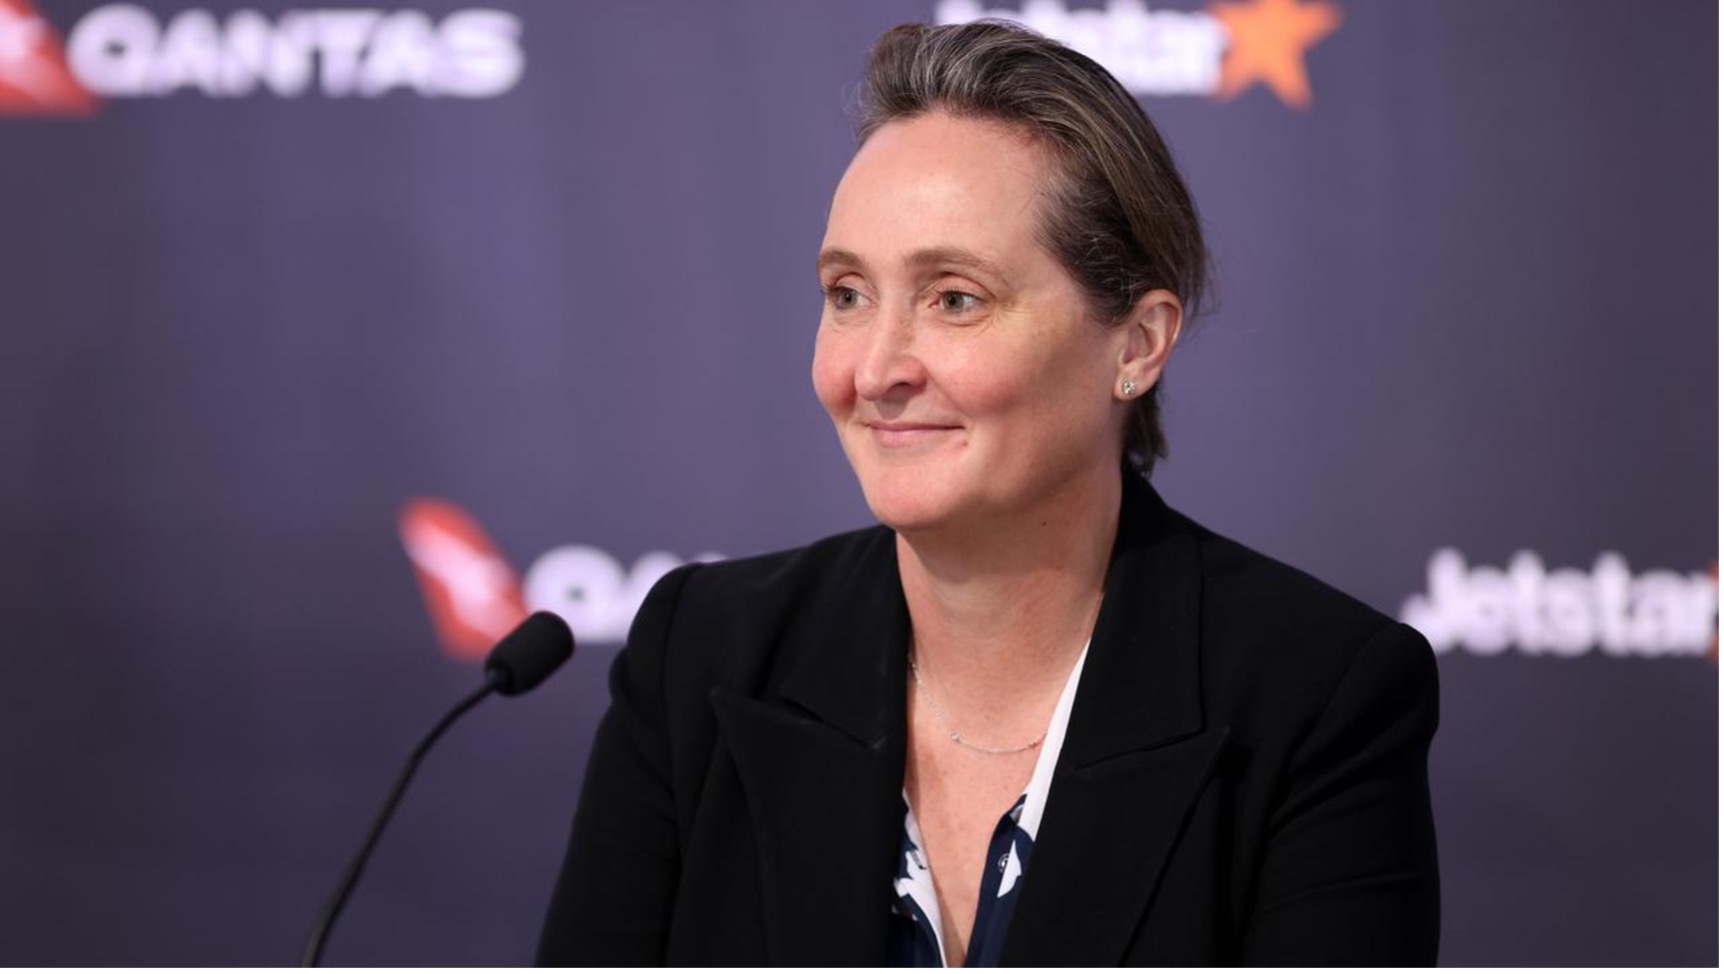 Qantas Appoints Vanessa Hudson as CEO, the First Woman to Lead the Airline